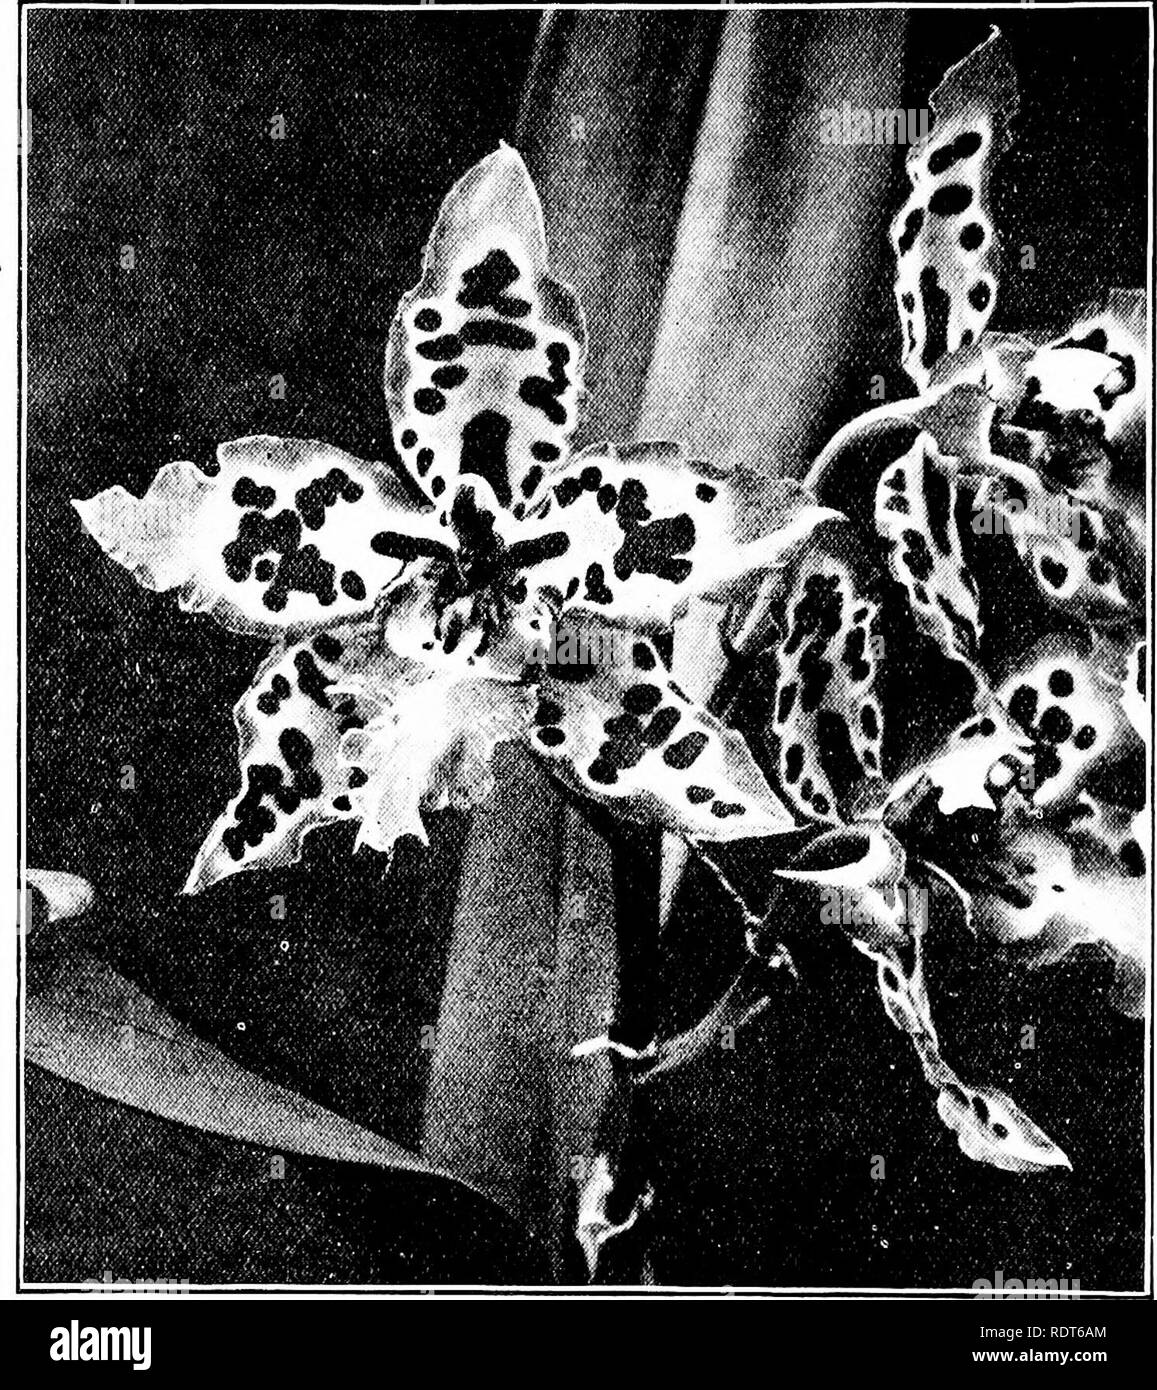 . The orchid stud-book: an enumeration of hybrid orchids of artificial origin, with their parents, raisers, date of first flowering, references to descriptions and figures, and synonymy. With an historical introduction and 120 figures and a chapter on hybridising and raising orchids from seed. Orchids. 290 THE ORCHID STUD-BOOK. [Part II. Suppl. O. X Cobbice, O.R. 1907, 83.—Fowler. 14g. 0. X Lucasianum (x cristatellum x Hallii), G.C. 1905, i. 333 (v. heatonense); O.R. 1905, 172 (id.).—Schroder, 1905. 15. 0. X miriflcum (p. 126); G. World, 1905, 455, f. O. X Annie Louise, G.C. 1904, i. 239 ; O.R Stock Photo